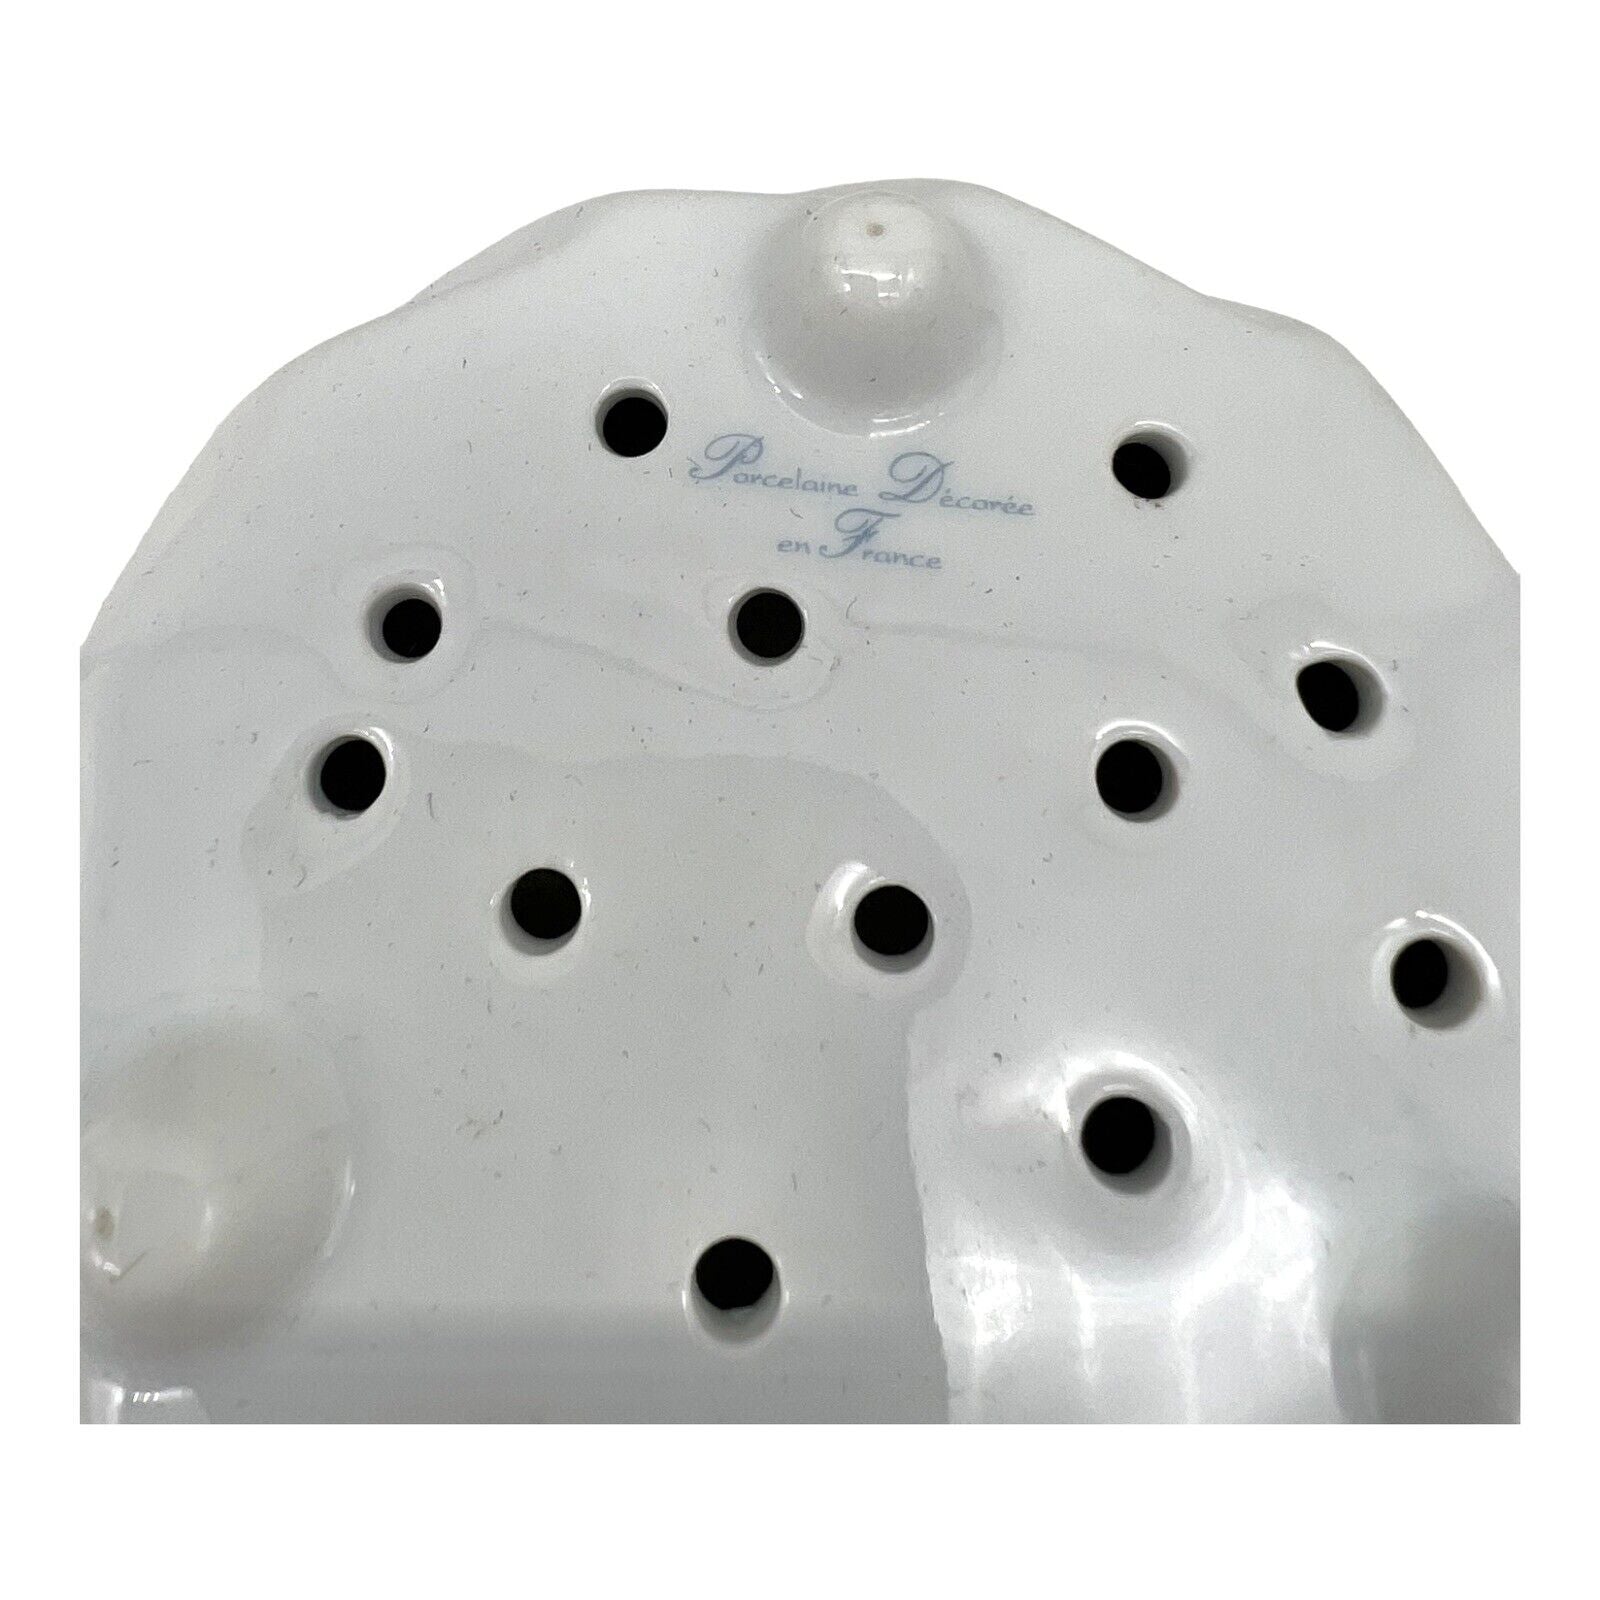 French porcelain jam colander sold by All Things French Store